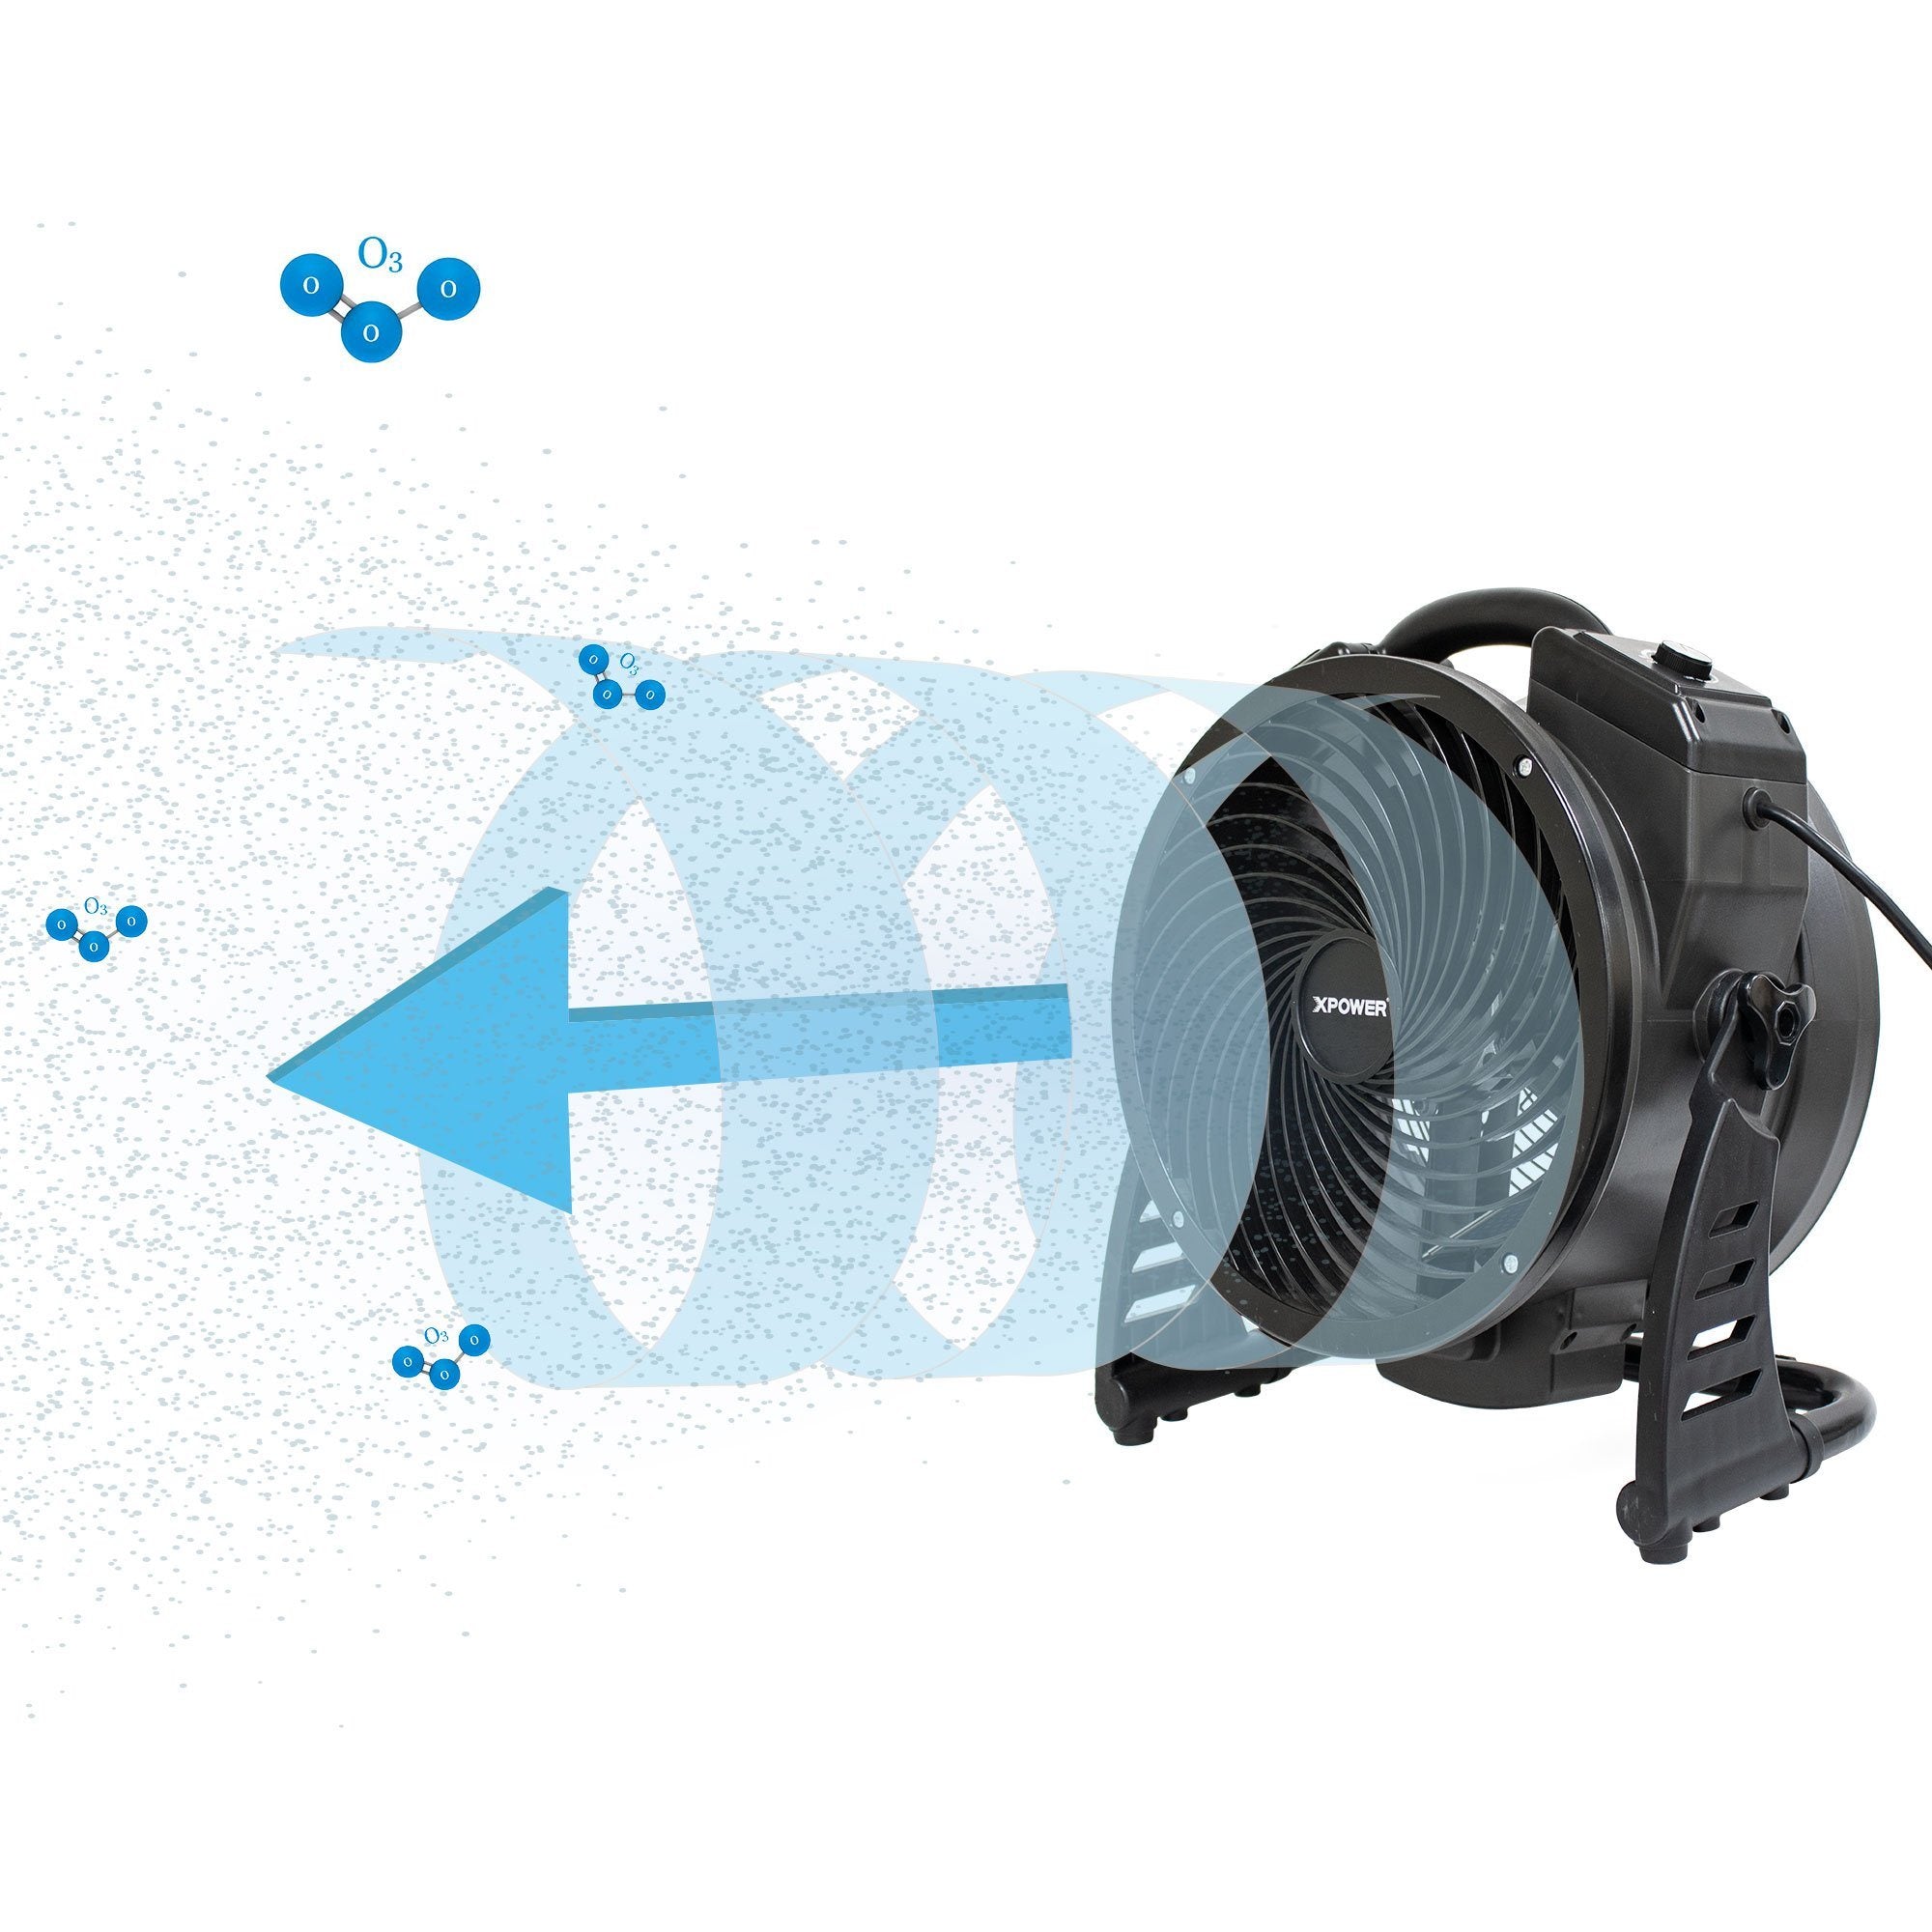 XPOWER Axial Air Mover with Ozone Generator Series